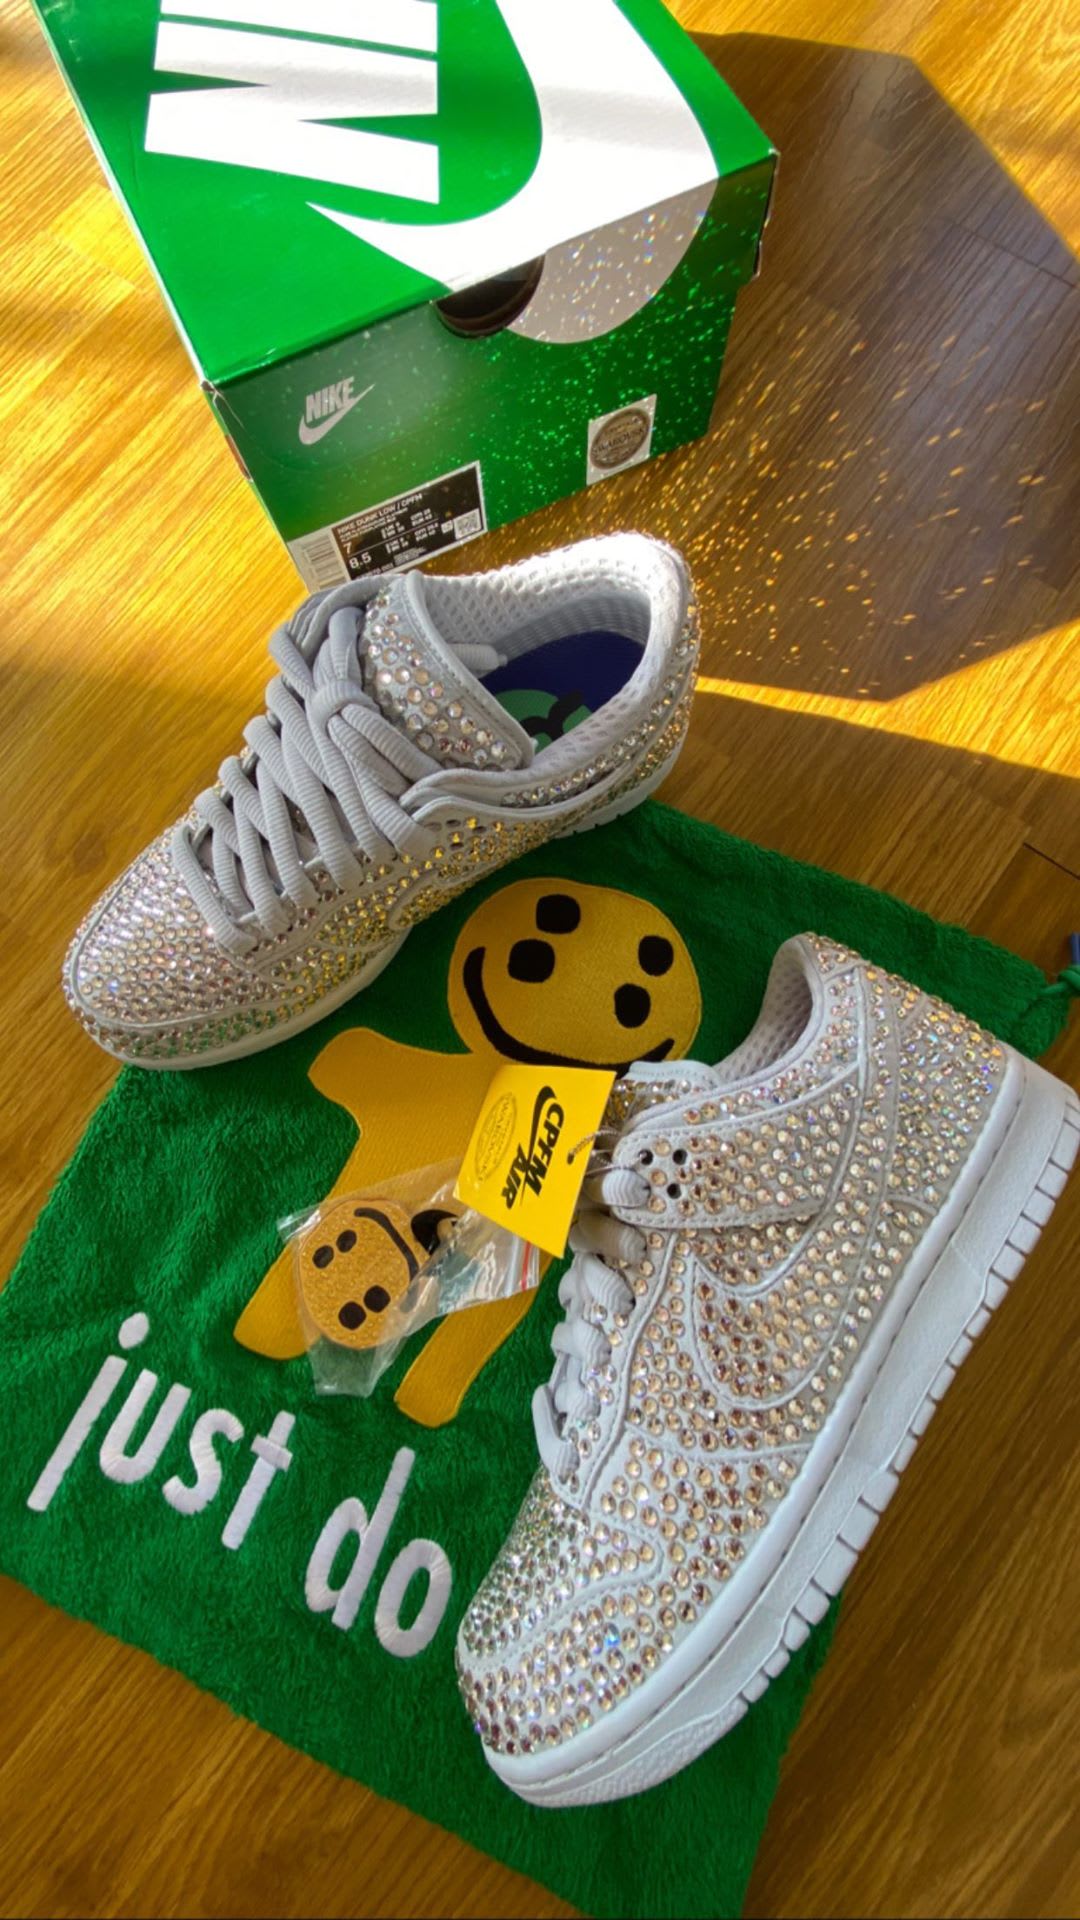 Kylie Jenner Just Got Diamond-Covered Nike Sneakers